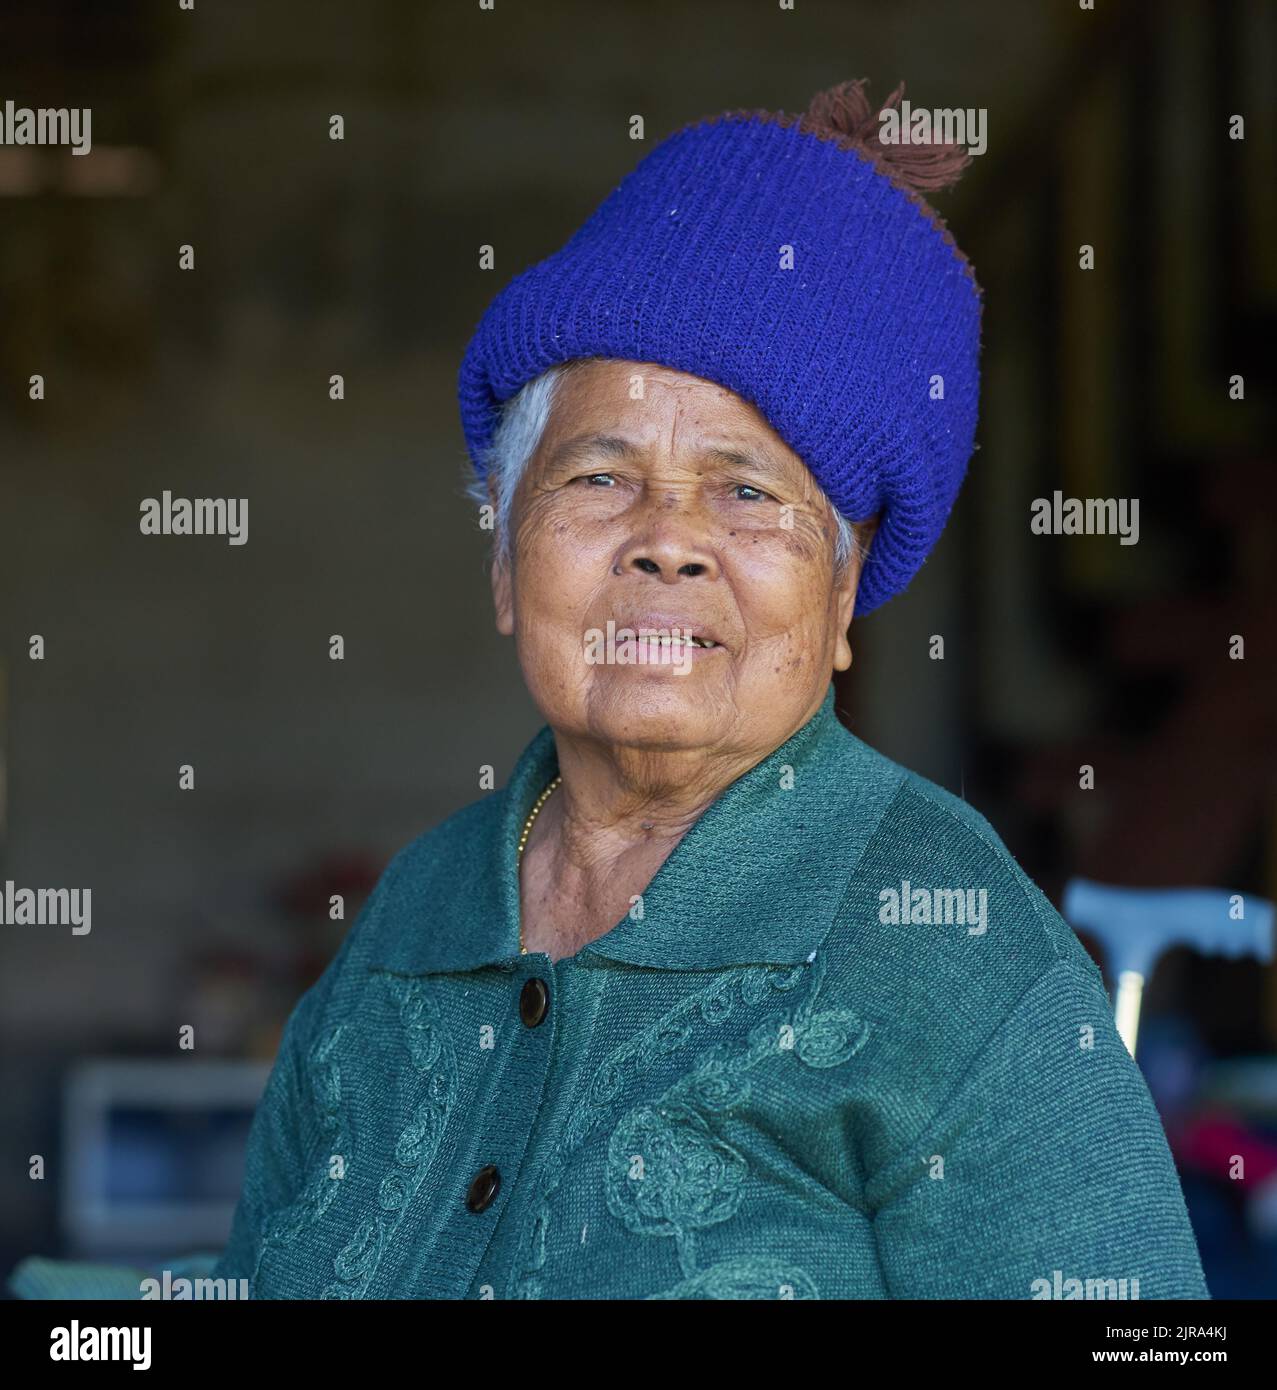 A portrait of an old ethnic lady in a blue hat, taken at Sakon Nakhon, Thailand. Stock Photo